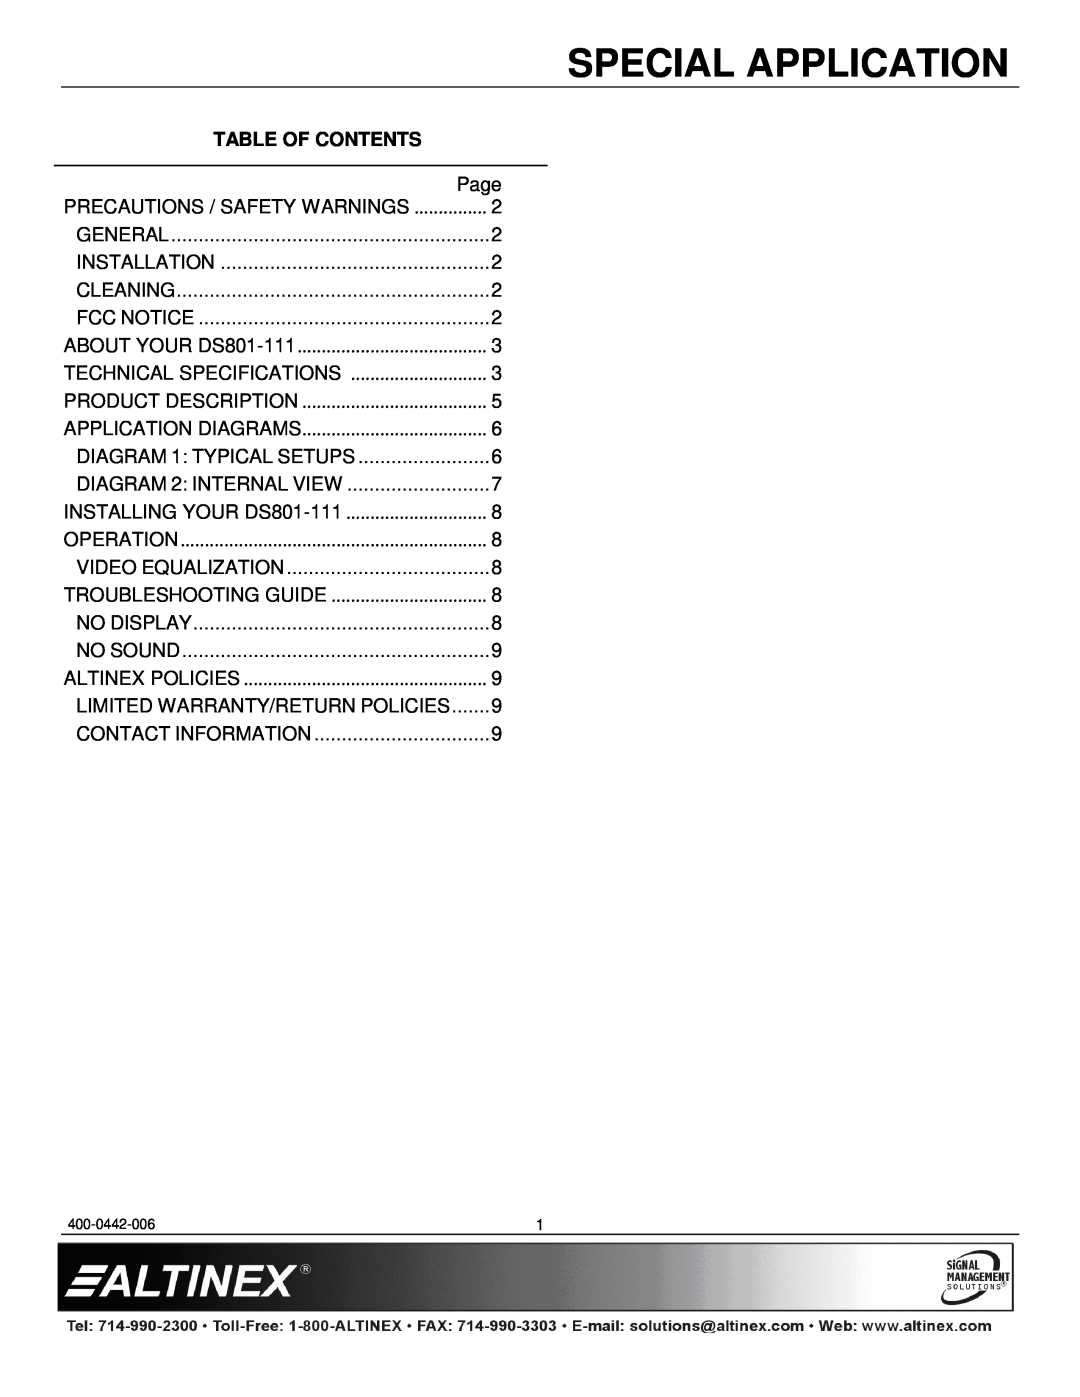 Altinex DS801-111 manual Table Of Contents, Special Application 